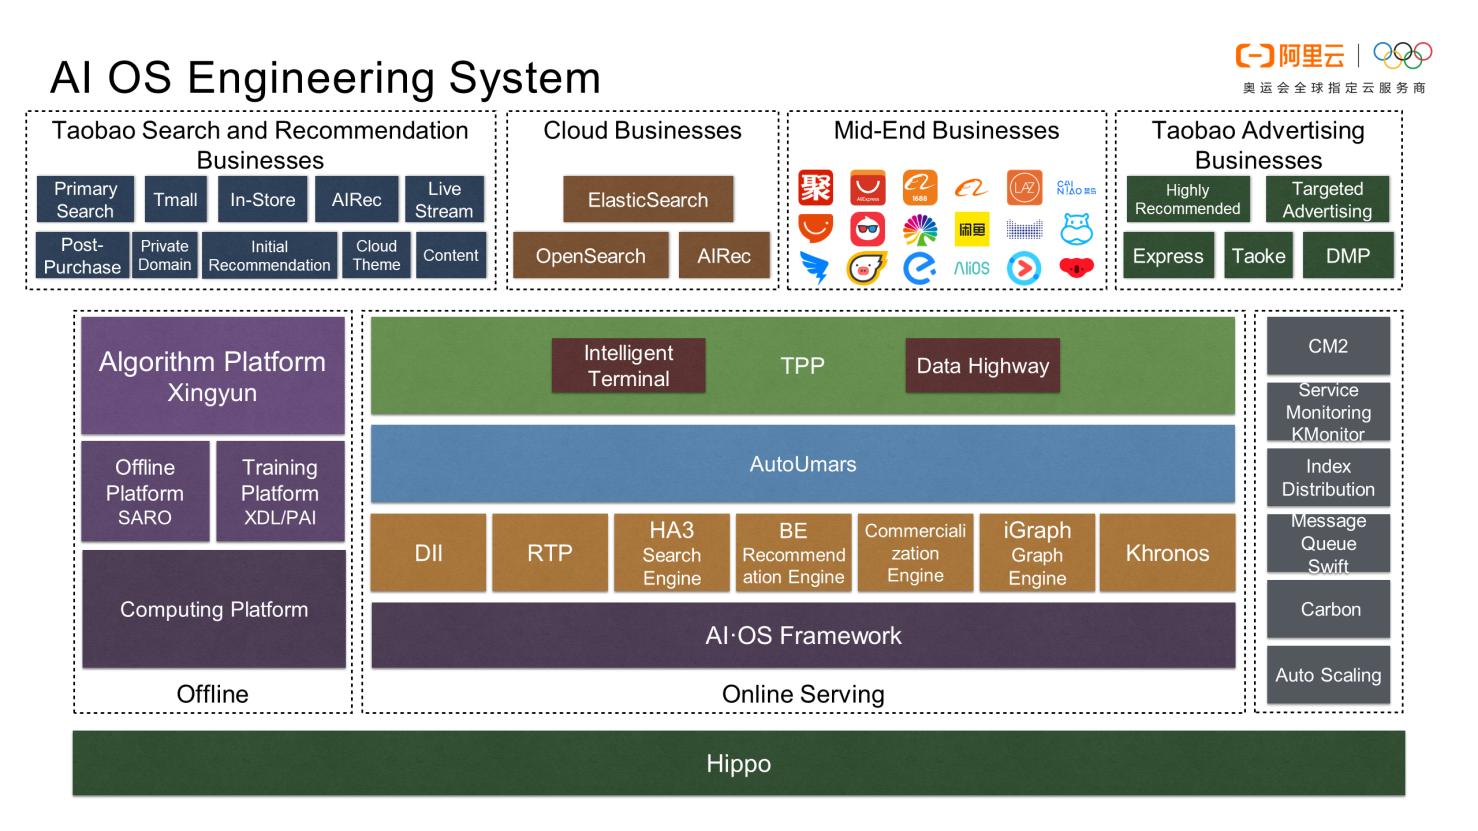 technologies of the AI OS engineering system